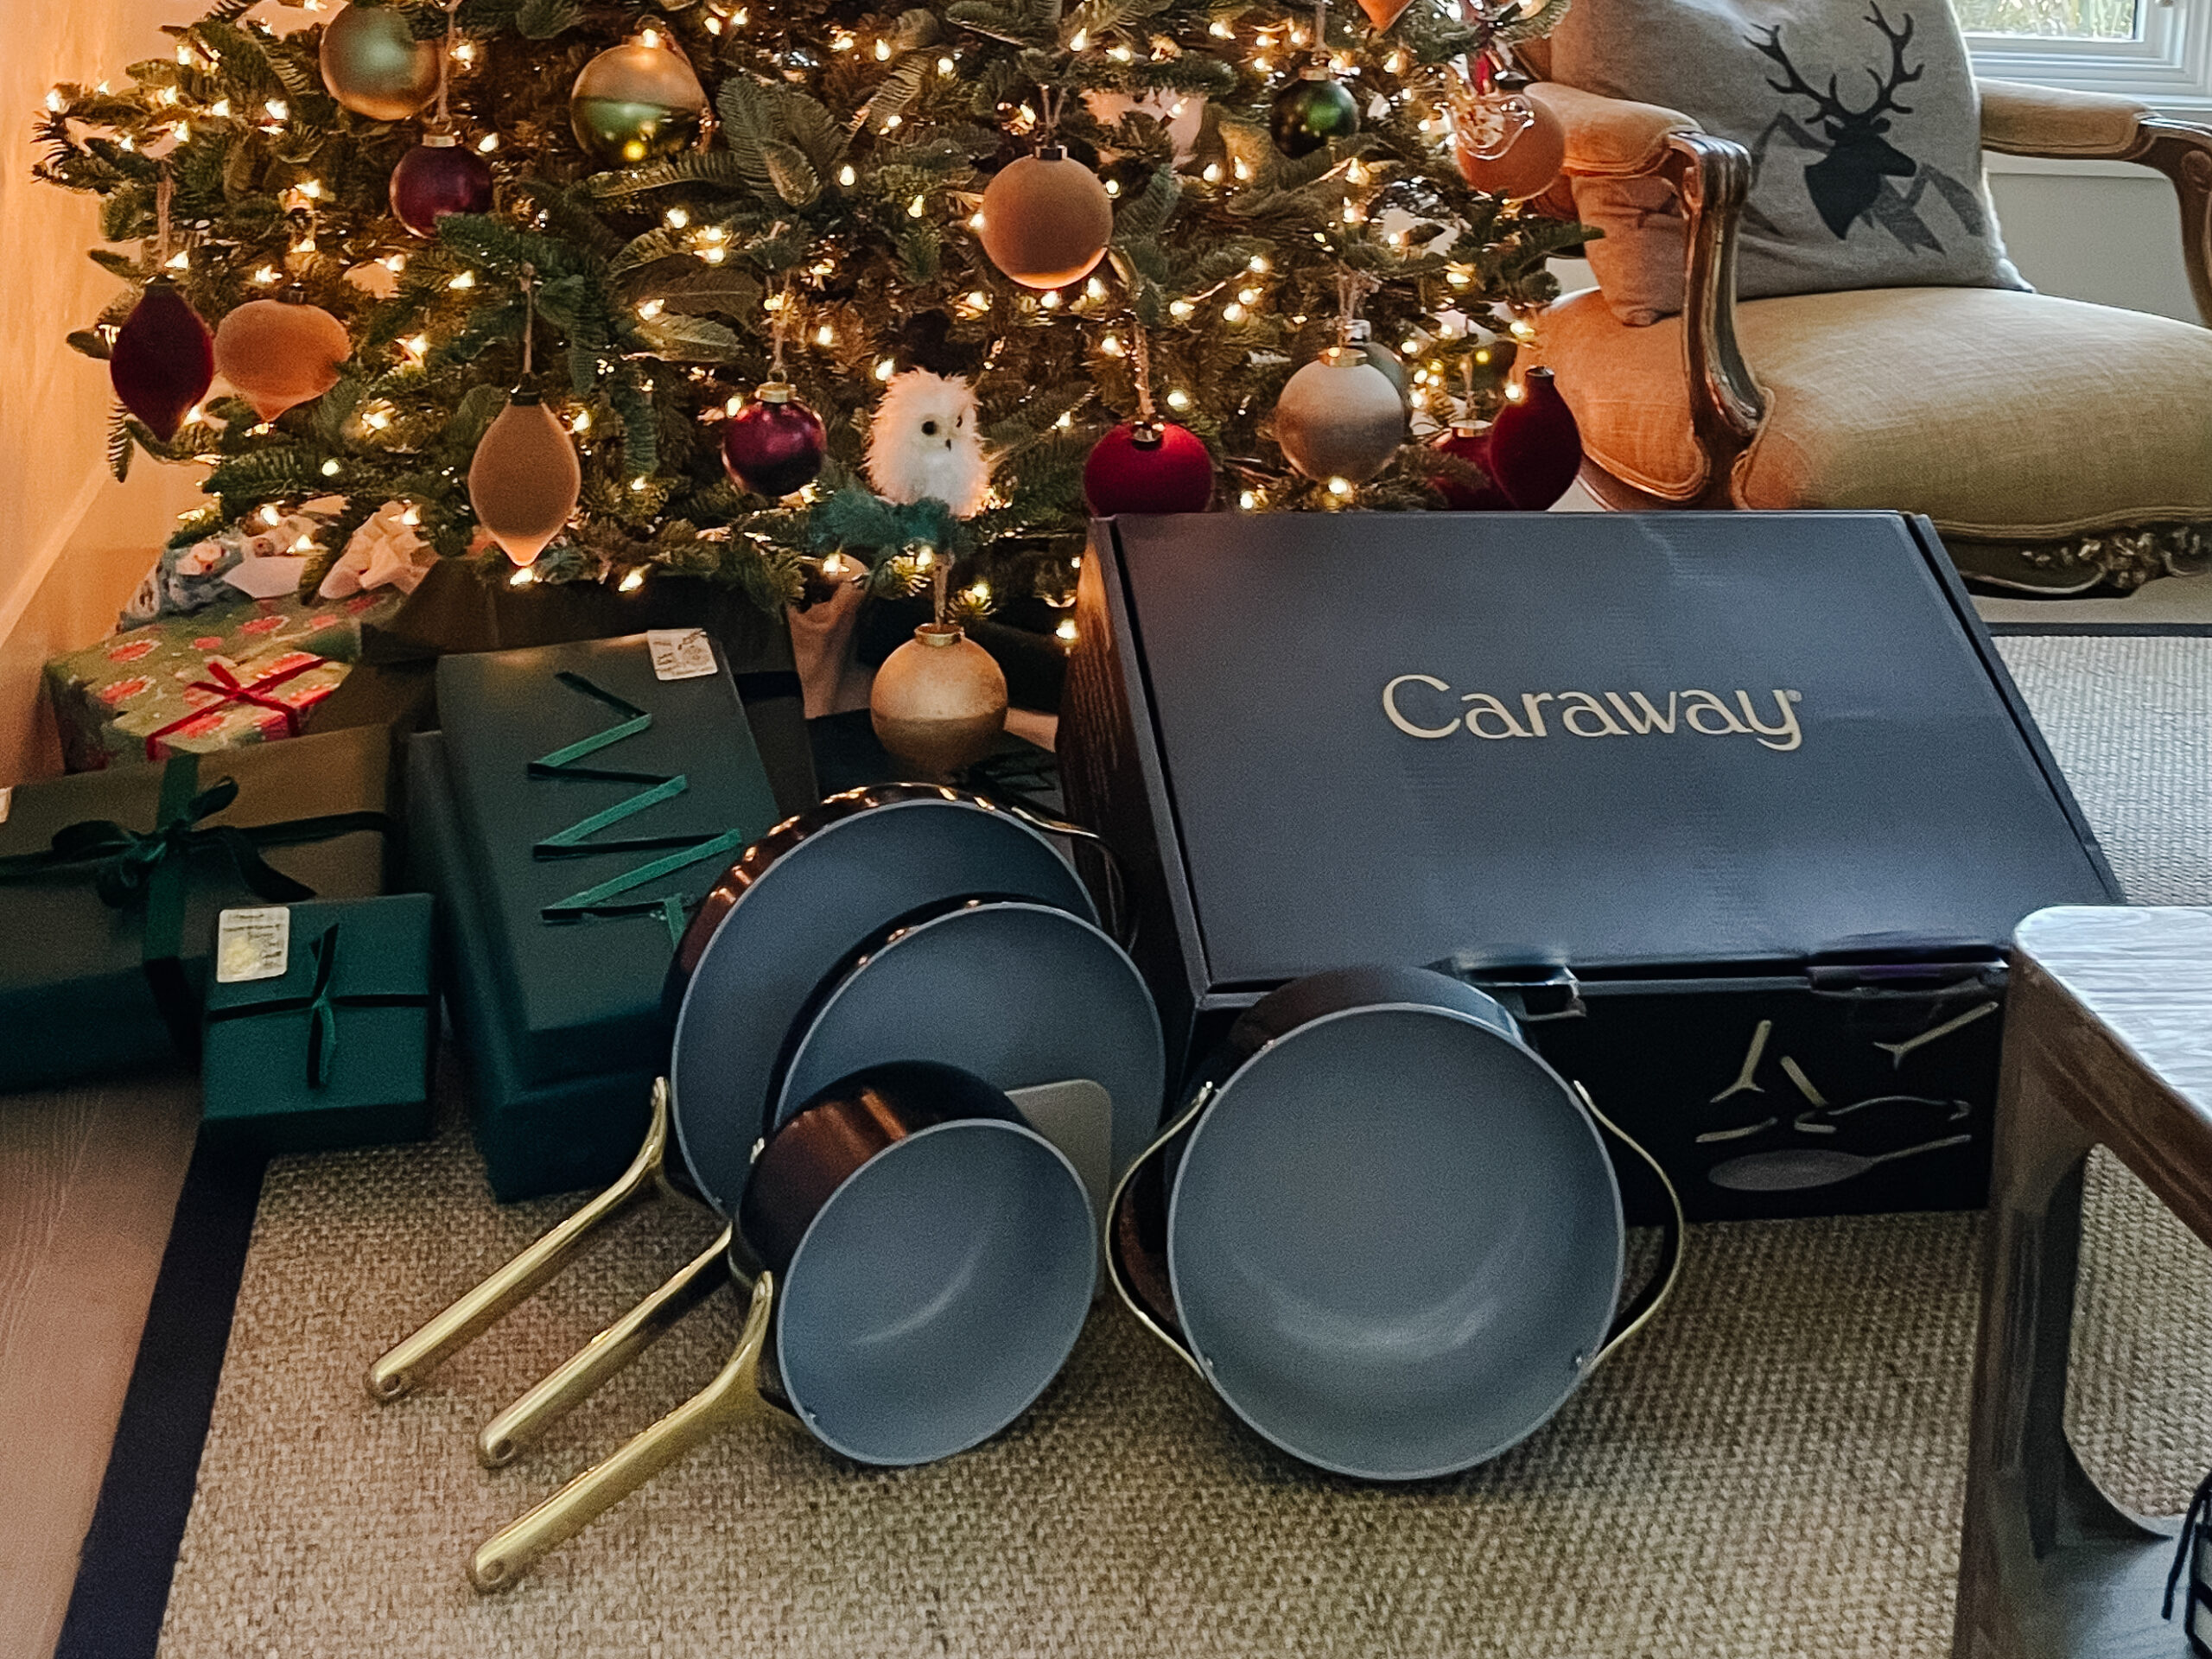 Beautiful black and gold Caraway cookware set under the Christmas tree